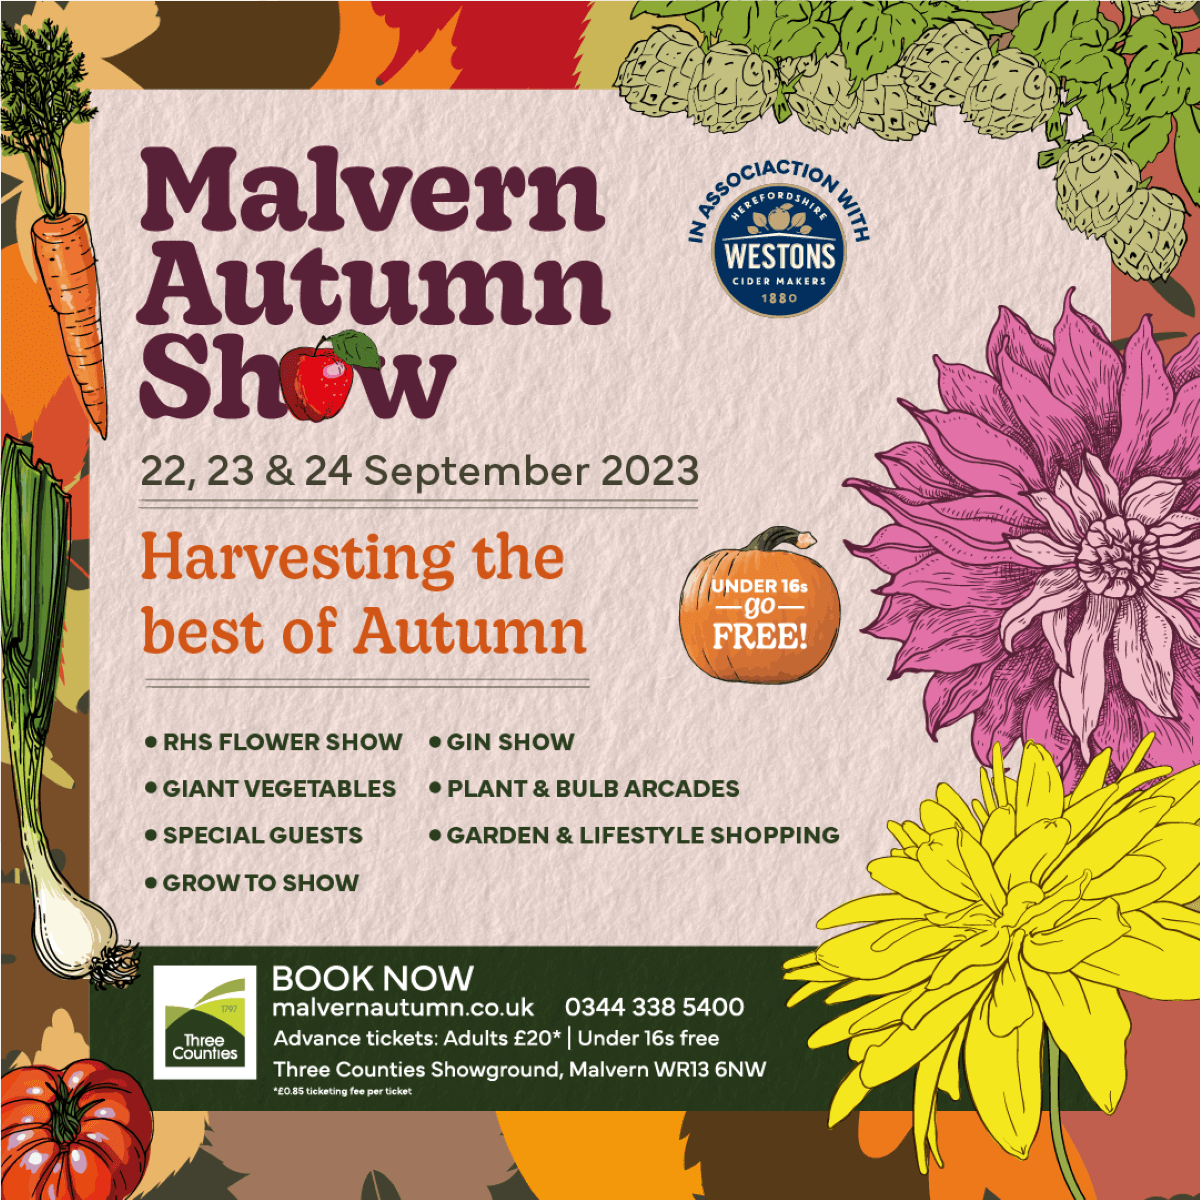 Malvern Autumn show graphic with seasonal flower, fruit and vegetable illistrations